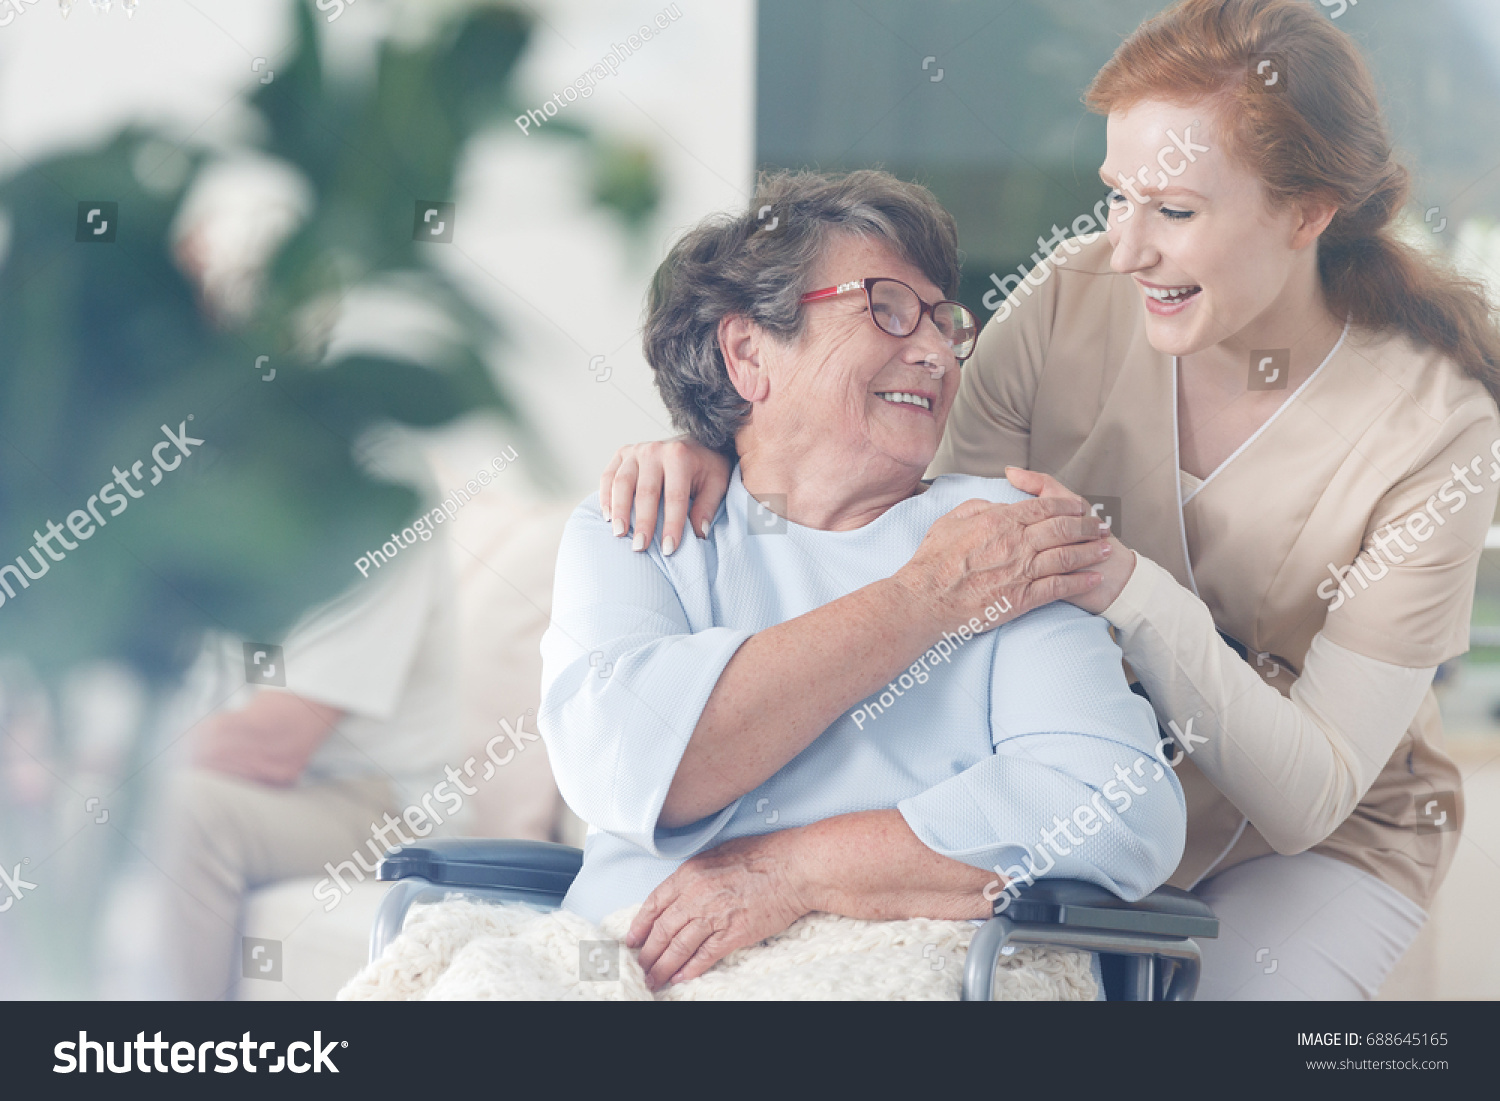 Happy patient is holding caregiver for a hand while spending time together #688645165